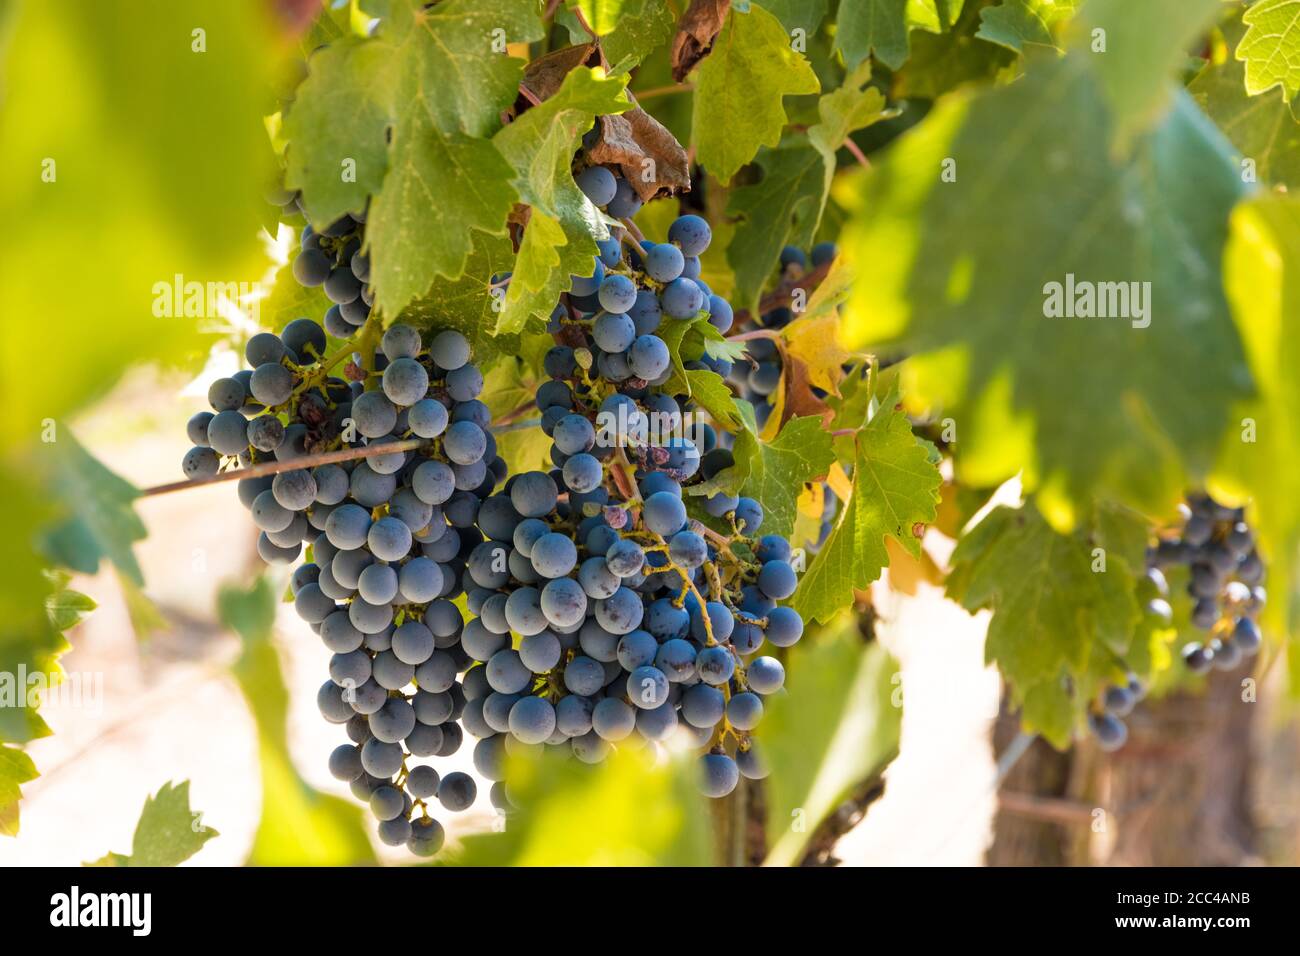 Lovely close-up view of fresh hanging purple Sangiovese grapes (Vitis vinifera) in clusters, hidden between leaves in a vineyard in San Gimignano,... Stock Photo